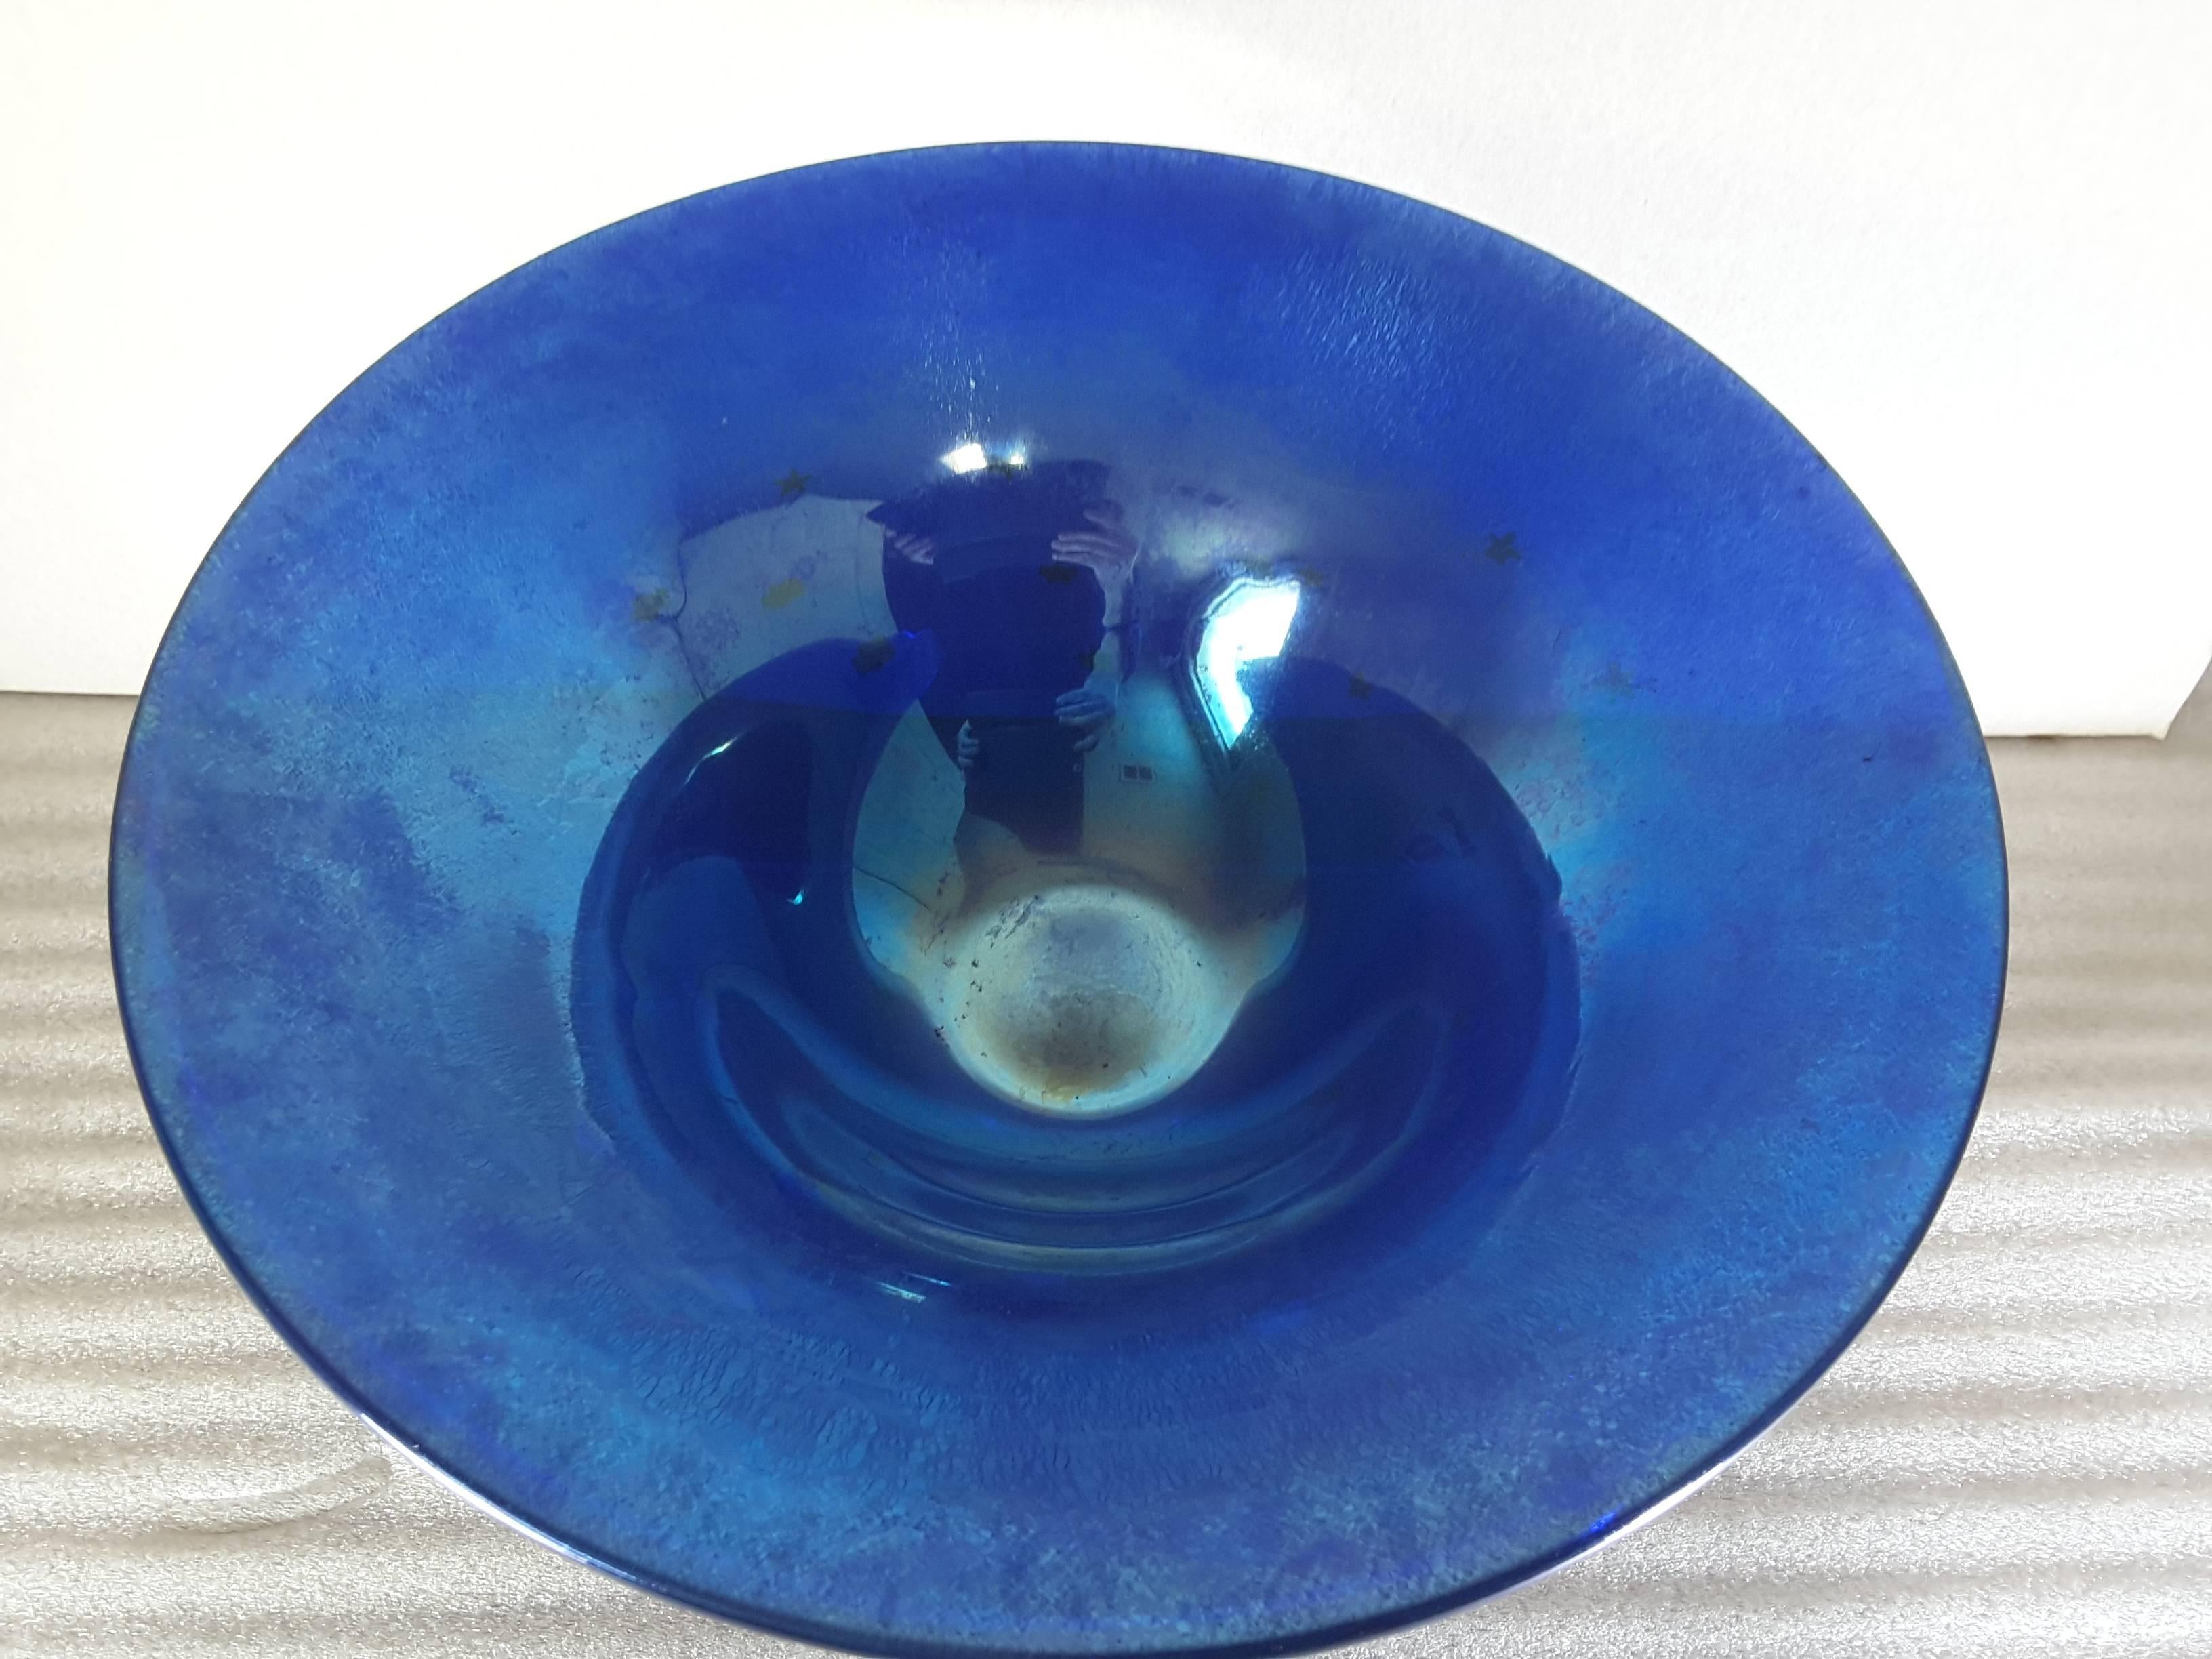 Lundberg Studios iridescent shooting star art glass bowl, signed and dated 1999, the signature looks like Ingrid. The bowl is flared at the top and tapered to a footed base. The bowl has a unground pontil and is signed and dated on the bottom. The